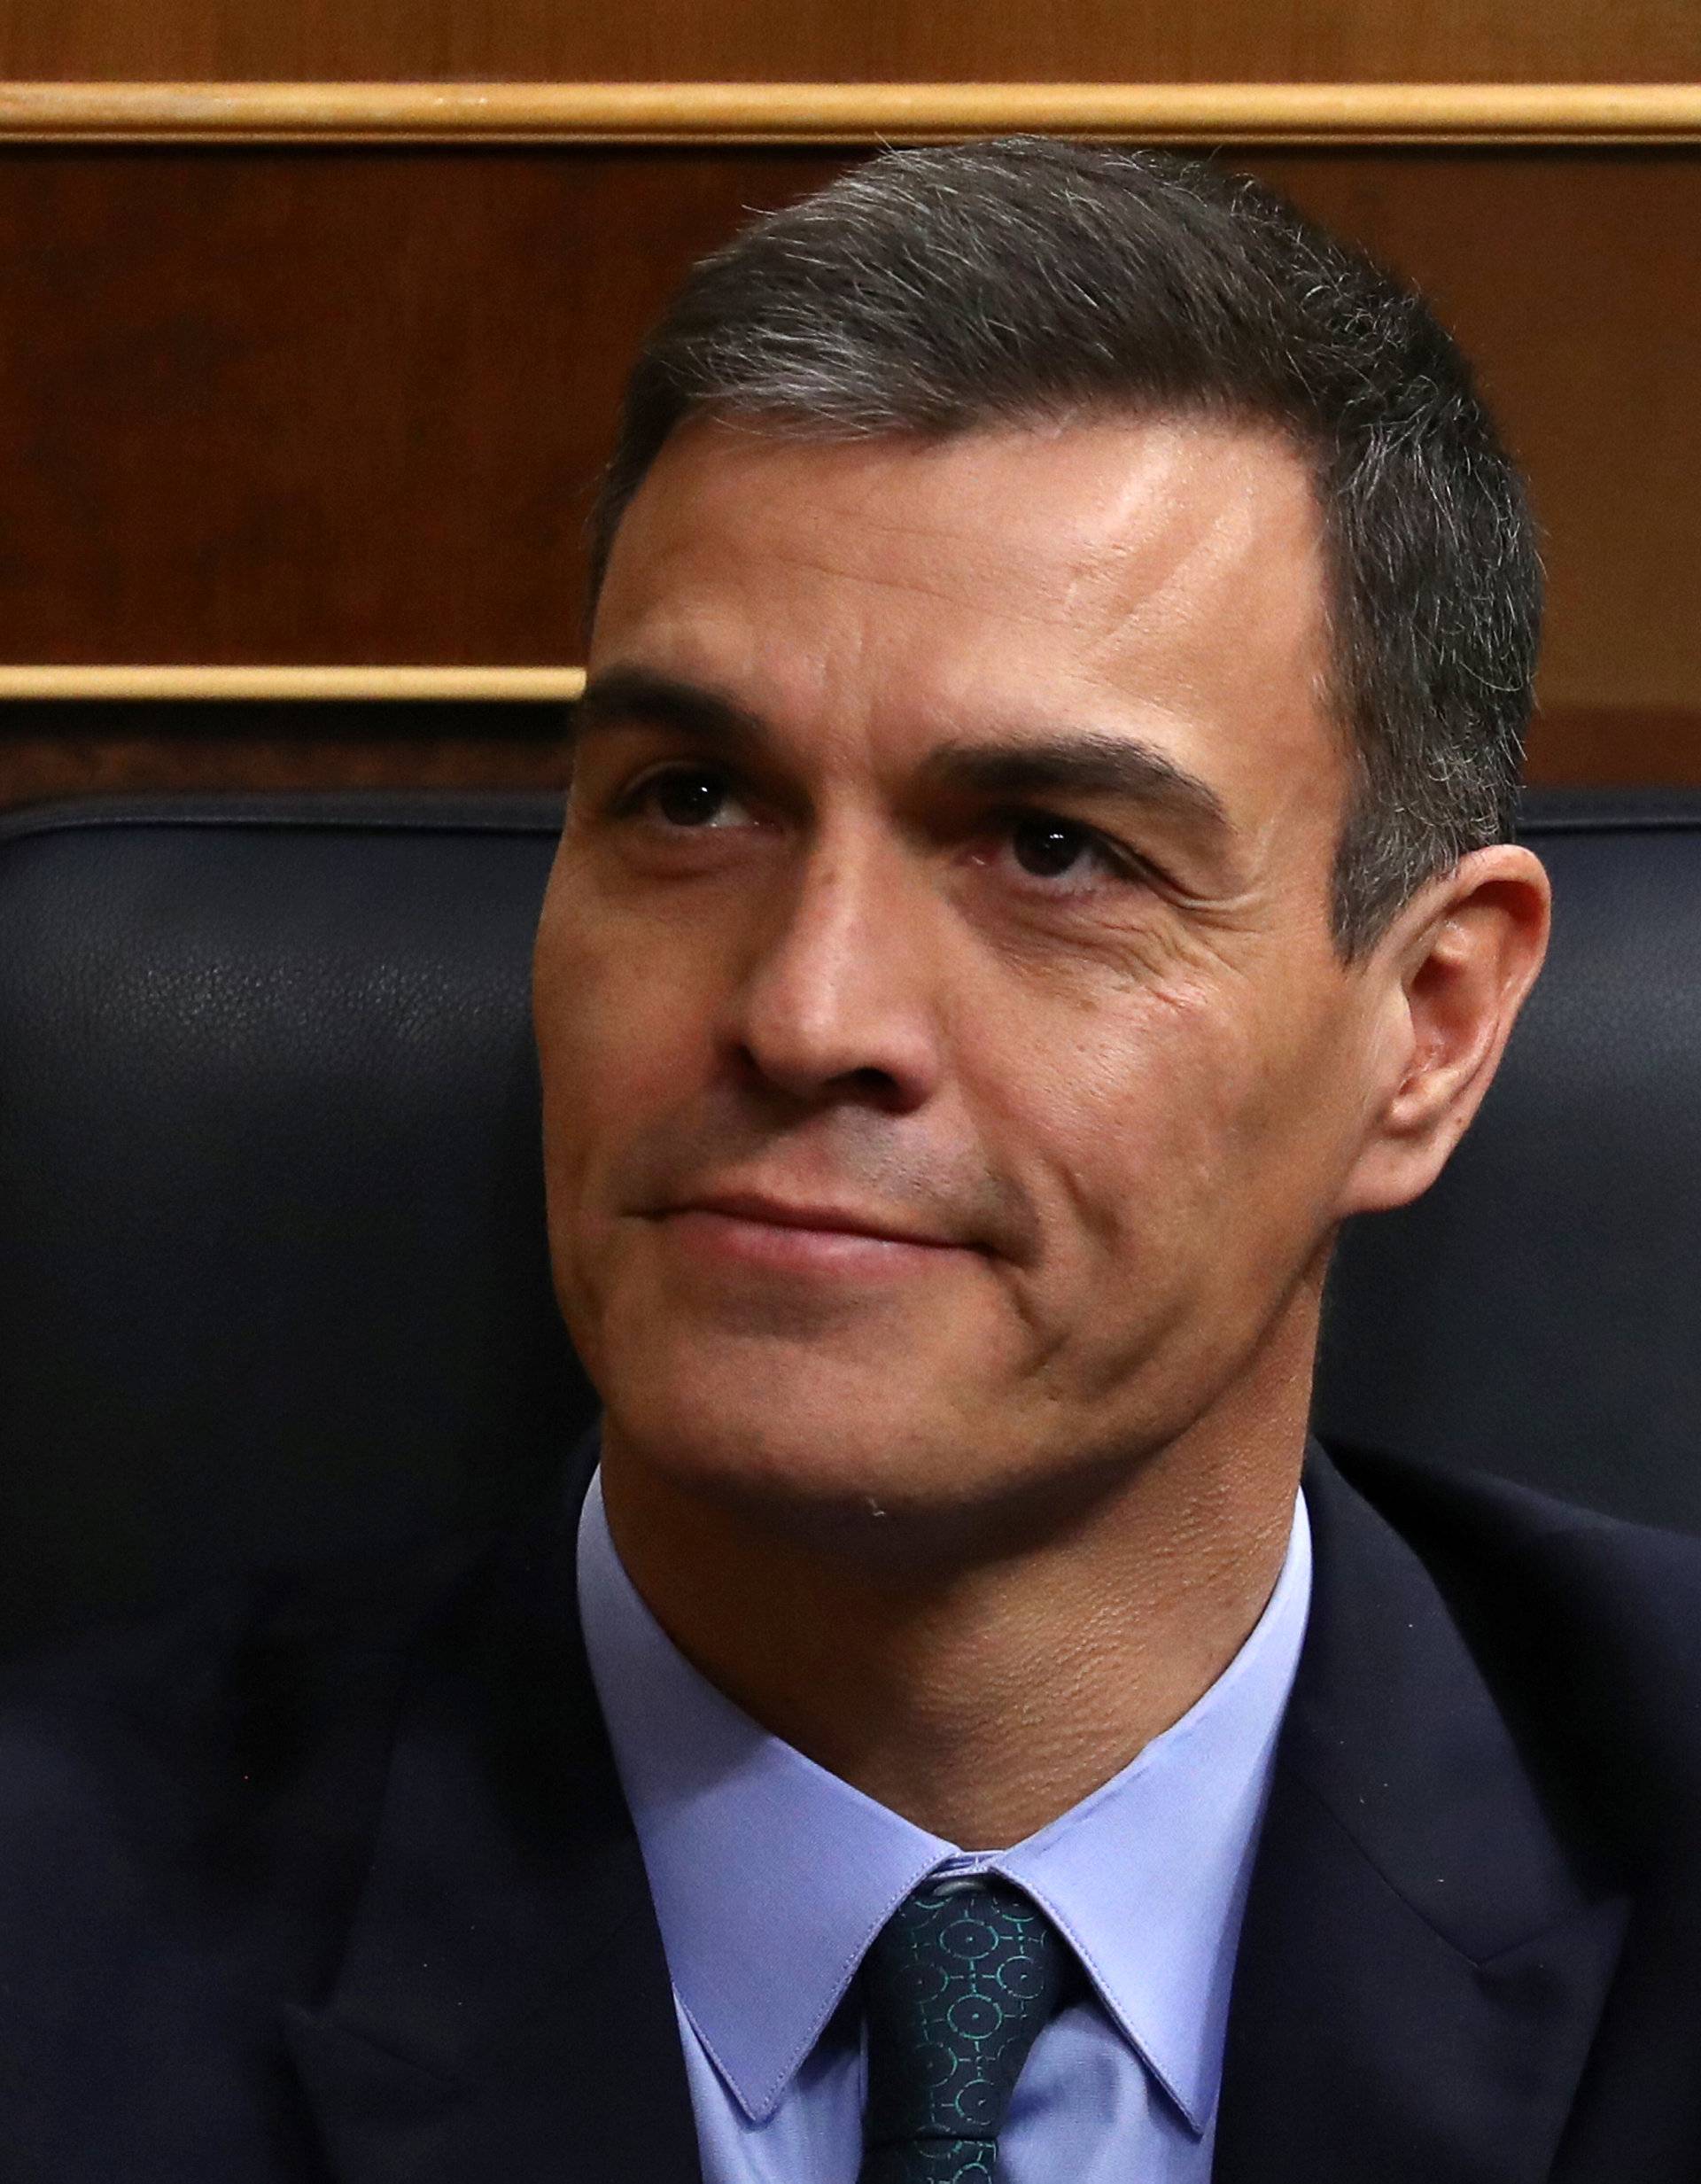 Spain's Prime Minister Pedro Sanchez reacts during a session at Parliament in Madrid